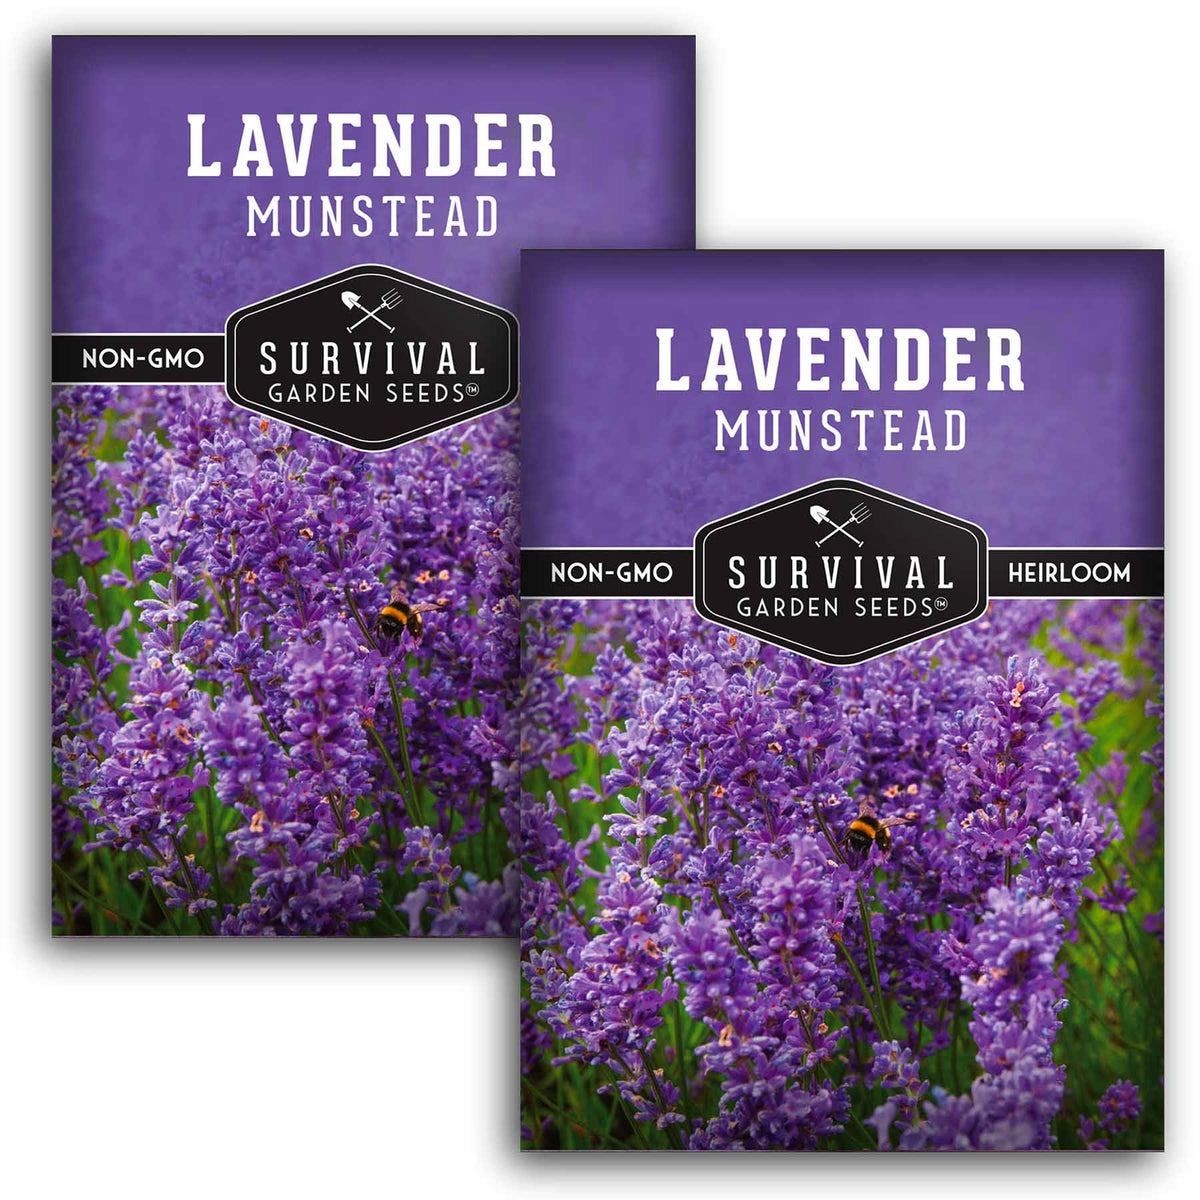 2 packets of Munstead Lavender seeds